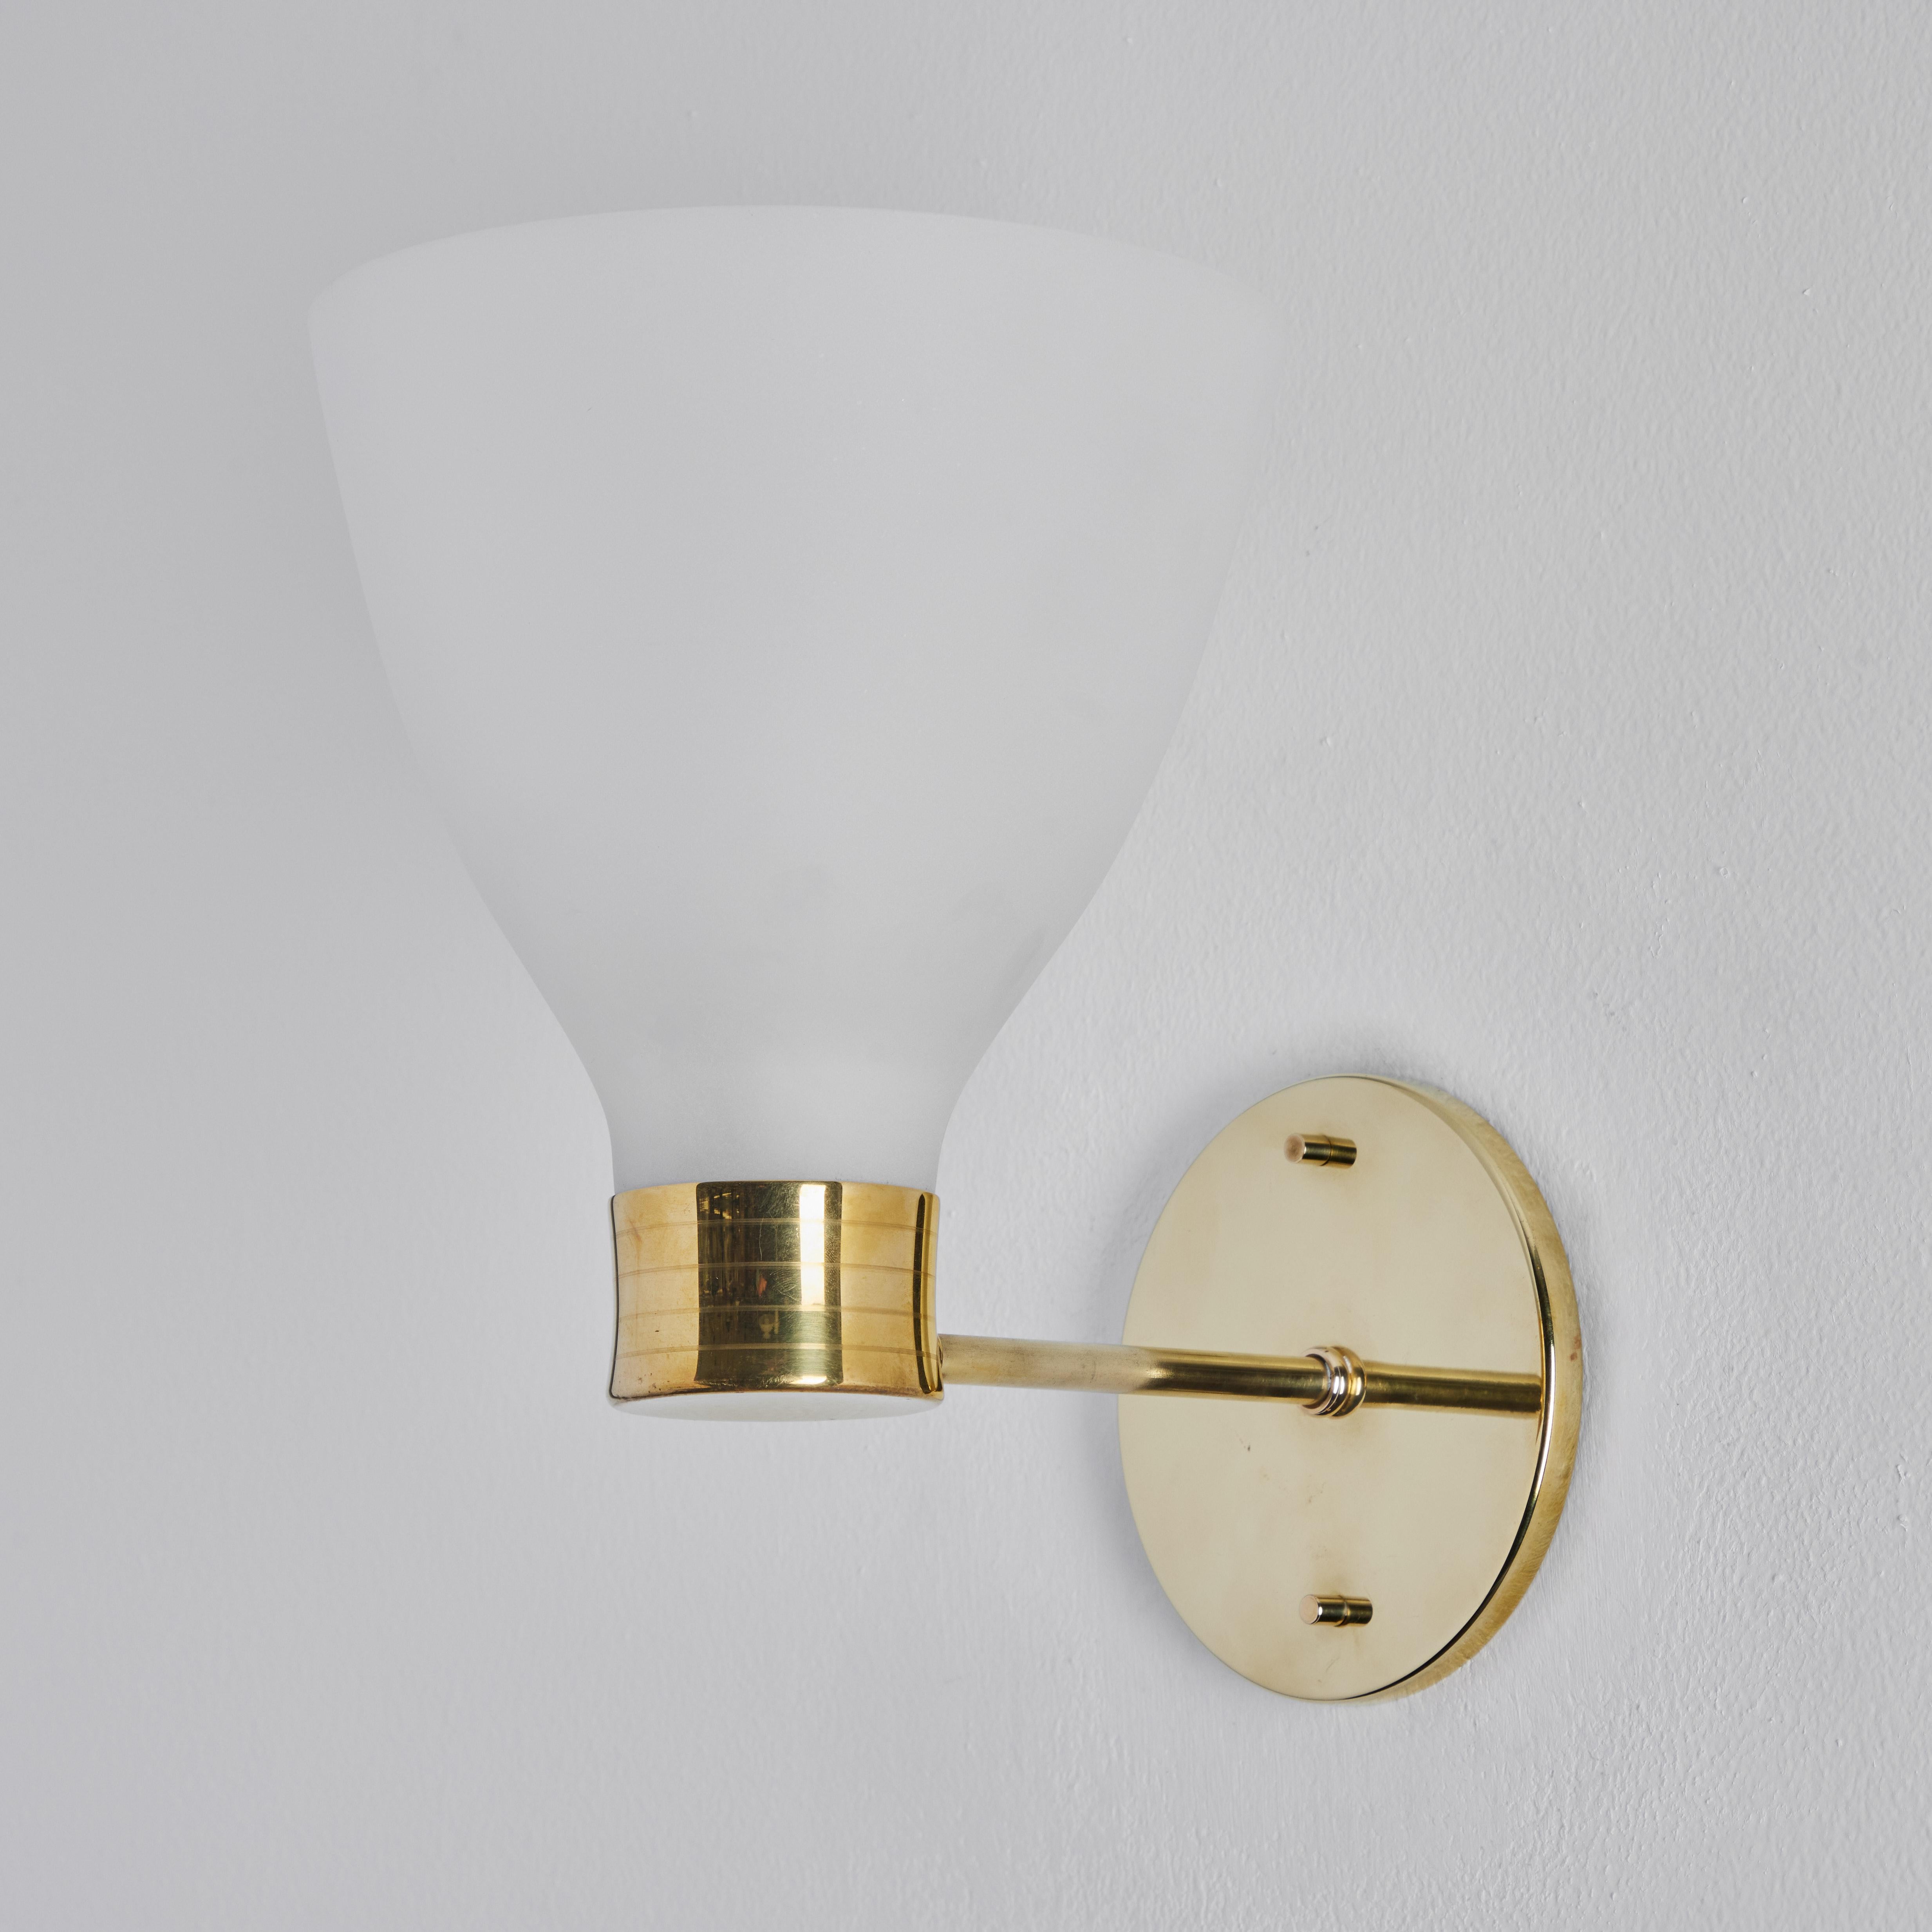 Pair of 1950s Lisa Johansson-Pape glass & brass wall lamps. Executed in matte opaline white glass and brass.

Price is for the pair.

A contemporary of Paavo Tynell, the refined work of Lisa Johansson-Pape has made her an increasingly valued